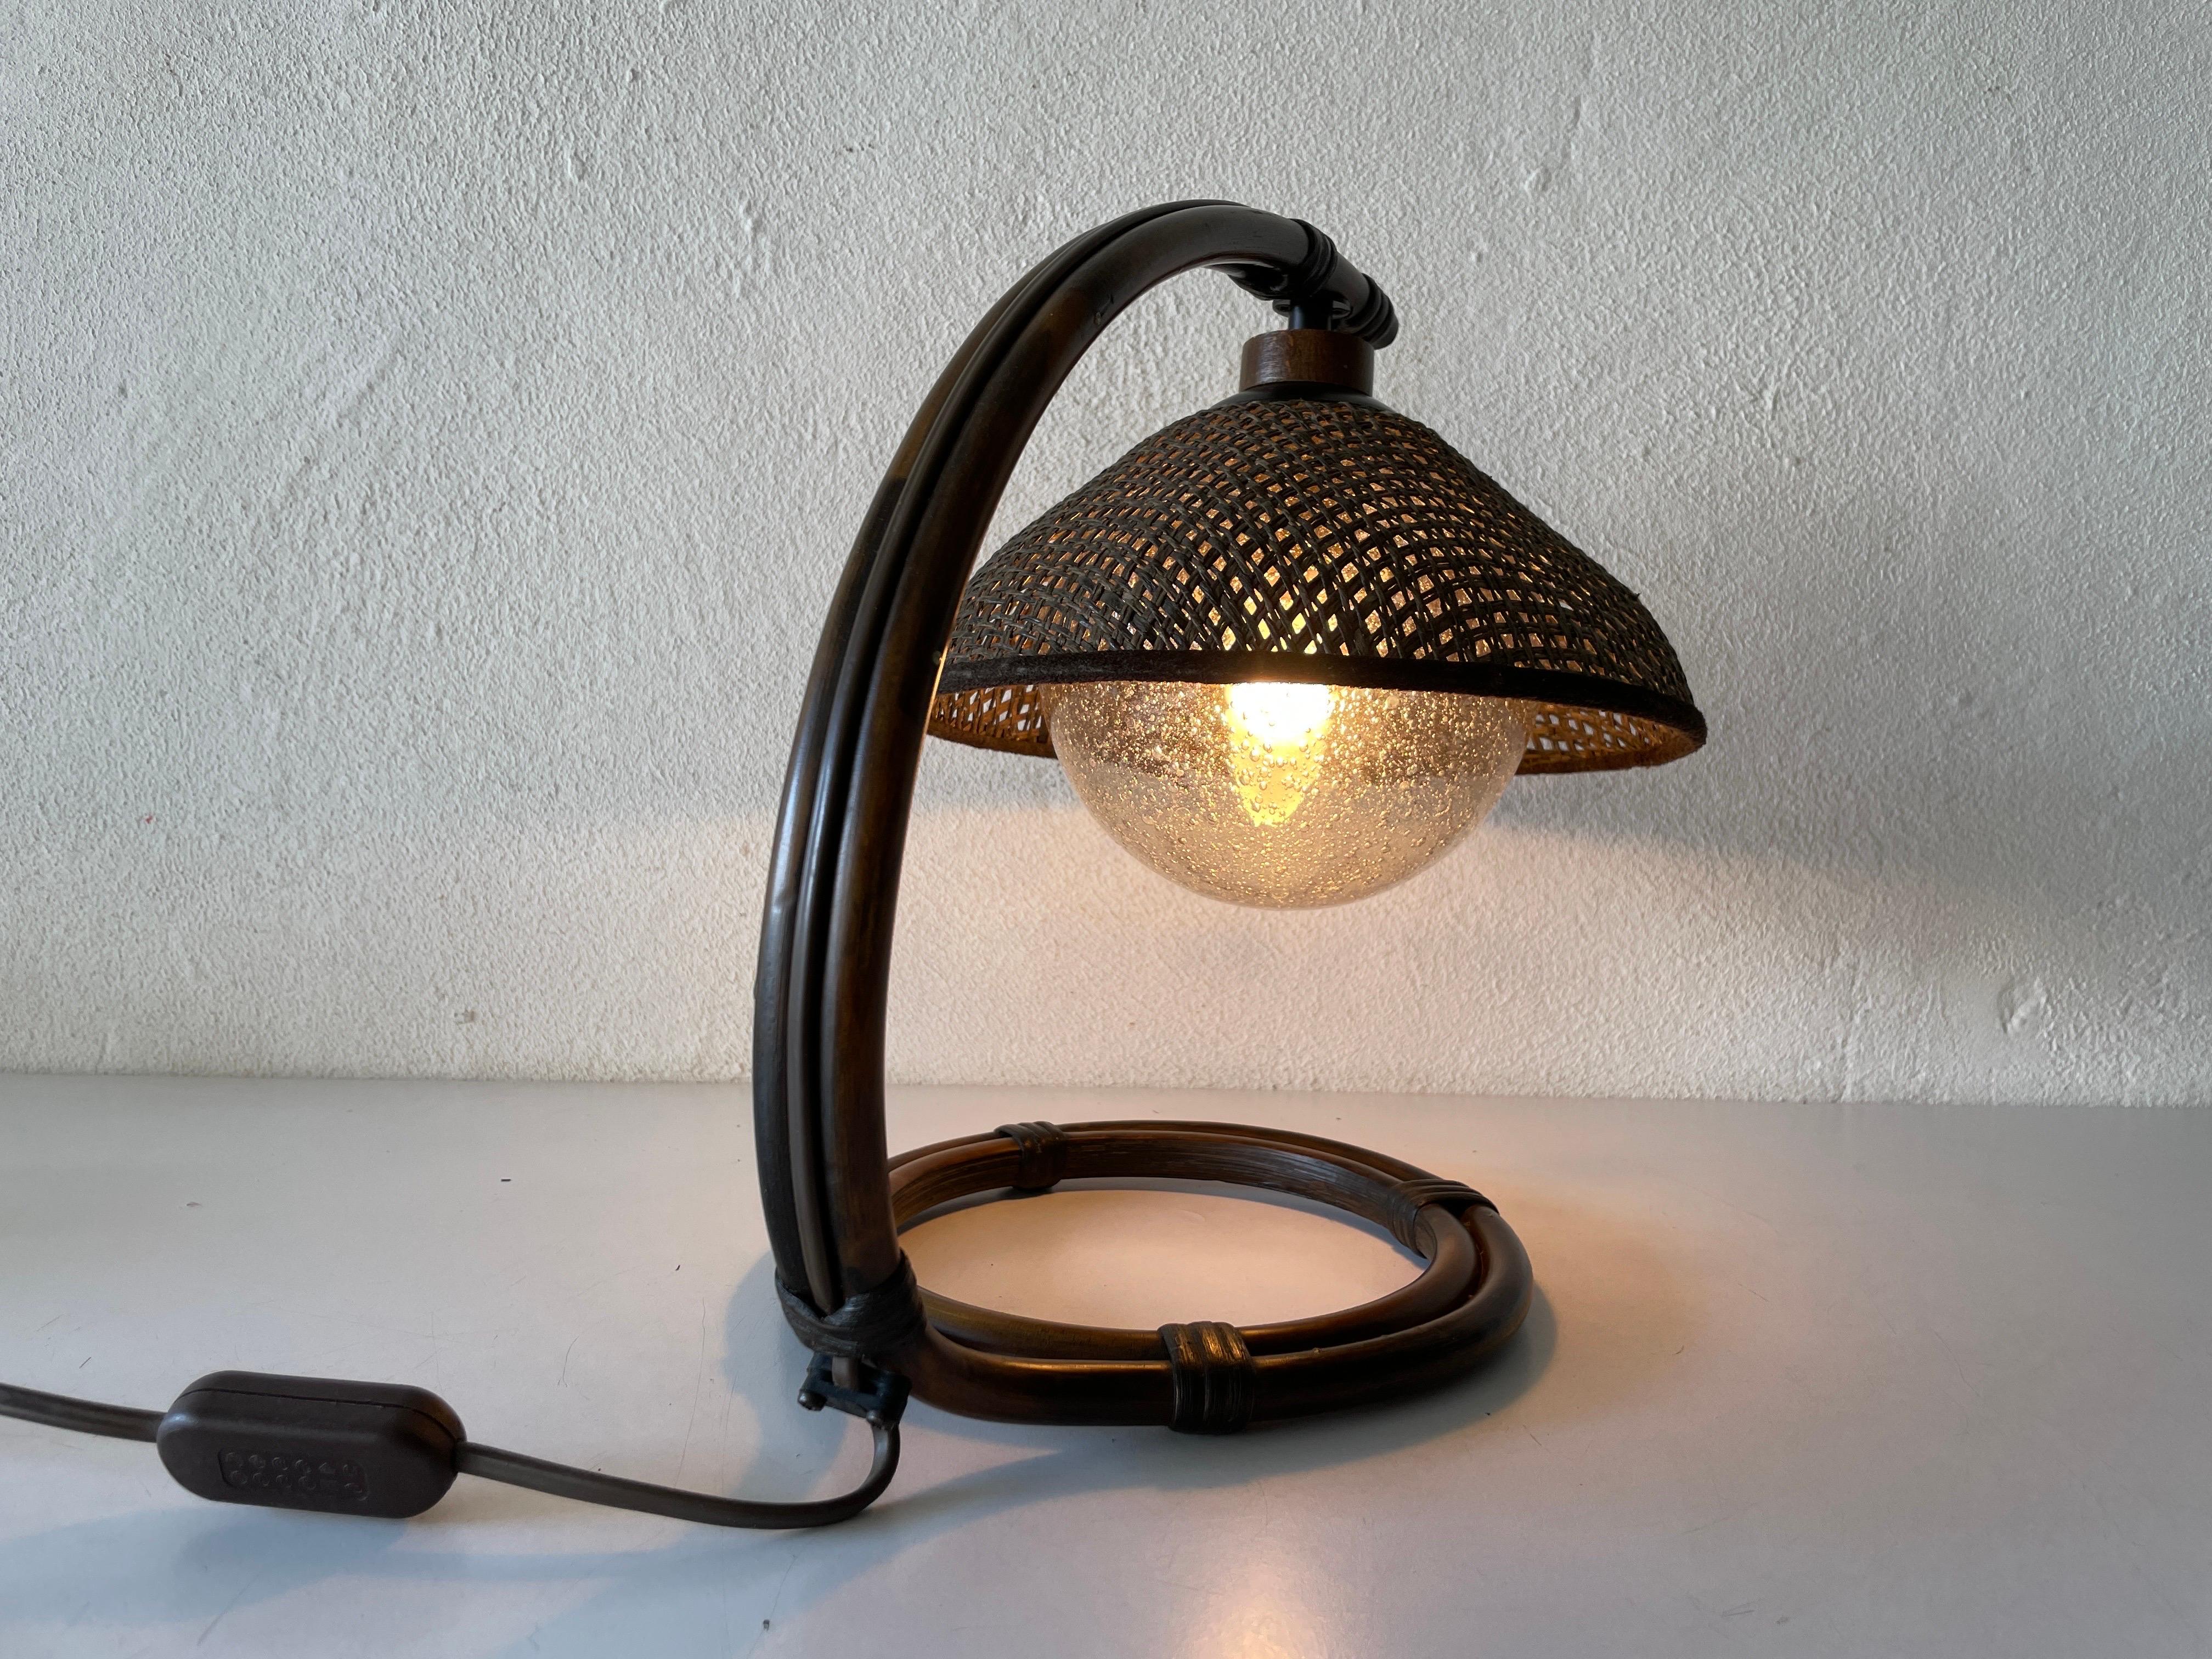 Rare Bamboo & Wicker Bedside Lamp Air Bubble Glass by Temde, 1960s, Switzerland For Sale 4